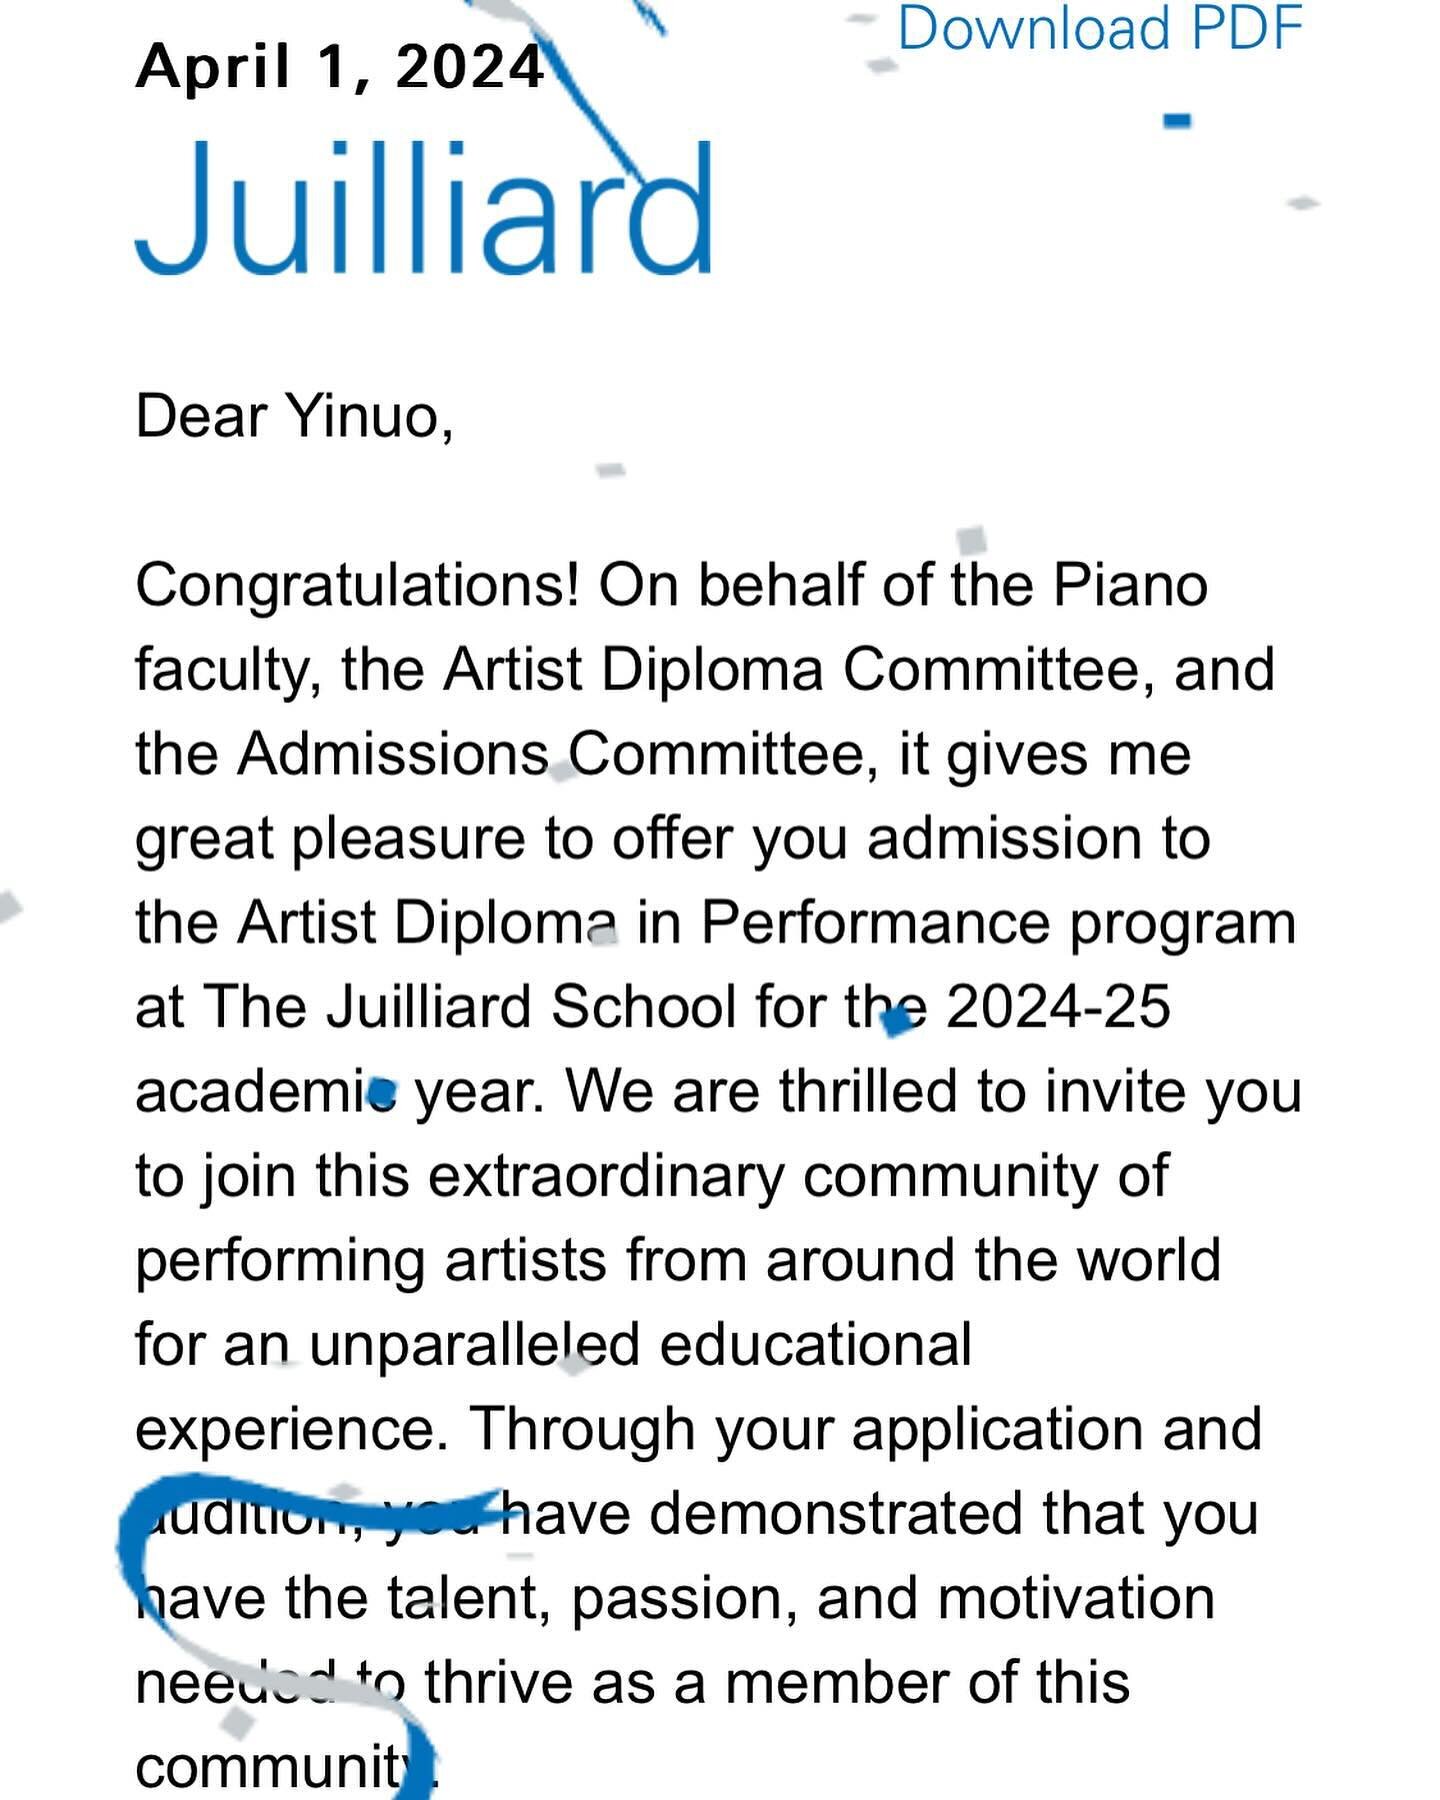 It was my honor to receive the Artist Diploma offers from both the Juilliard School and Yale School of Music. After much thought and consideration, I&rsquo;ve decided to continue my musical journey at Juilliard. As moving on to this next chapter, I&r